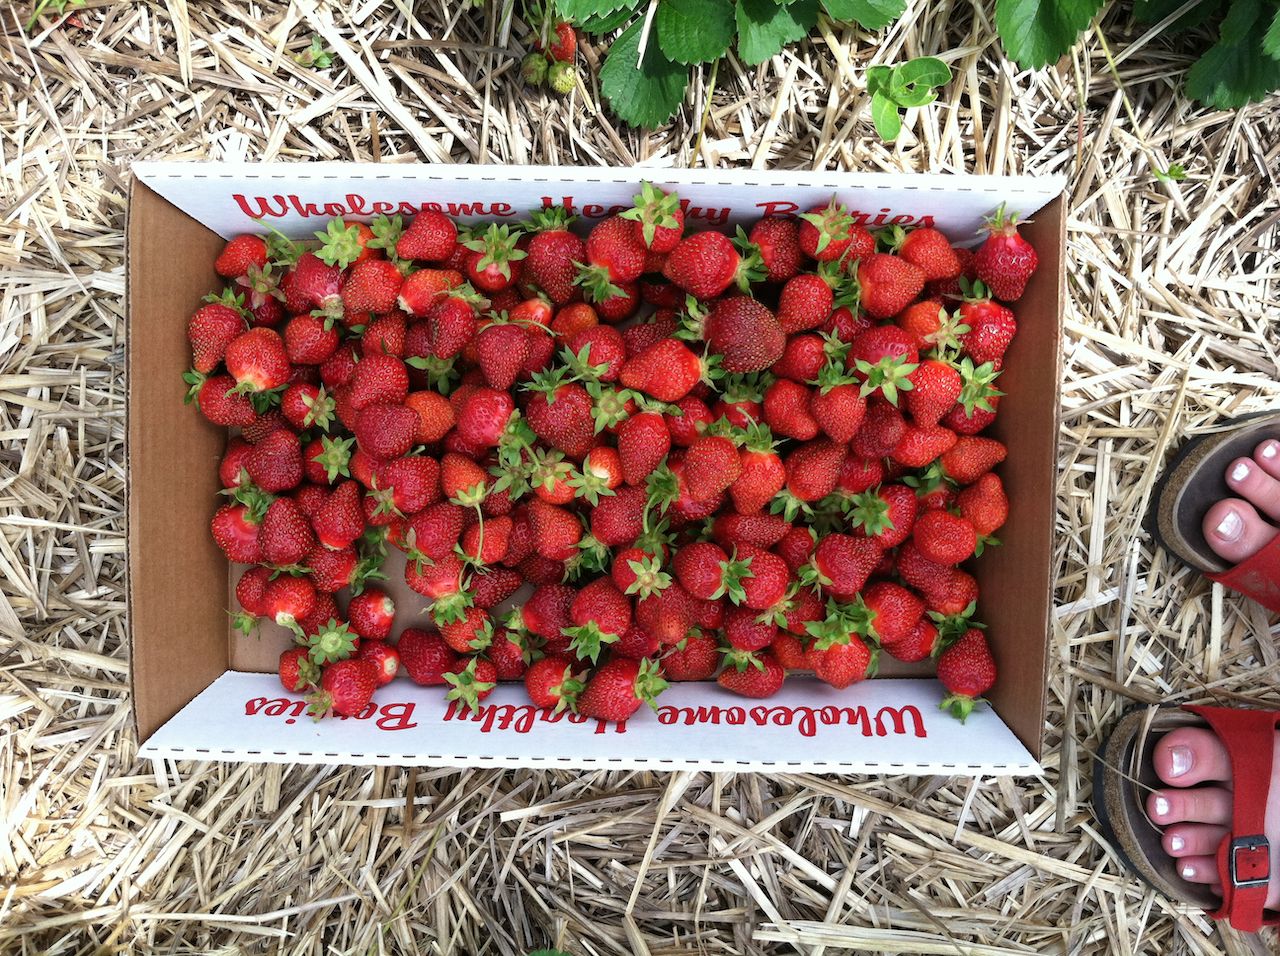 Strawberries picked from a berry patch in Wisconsin